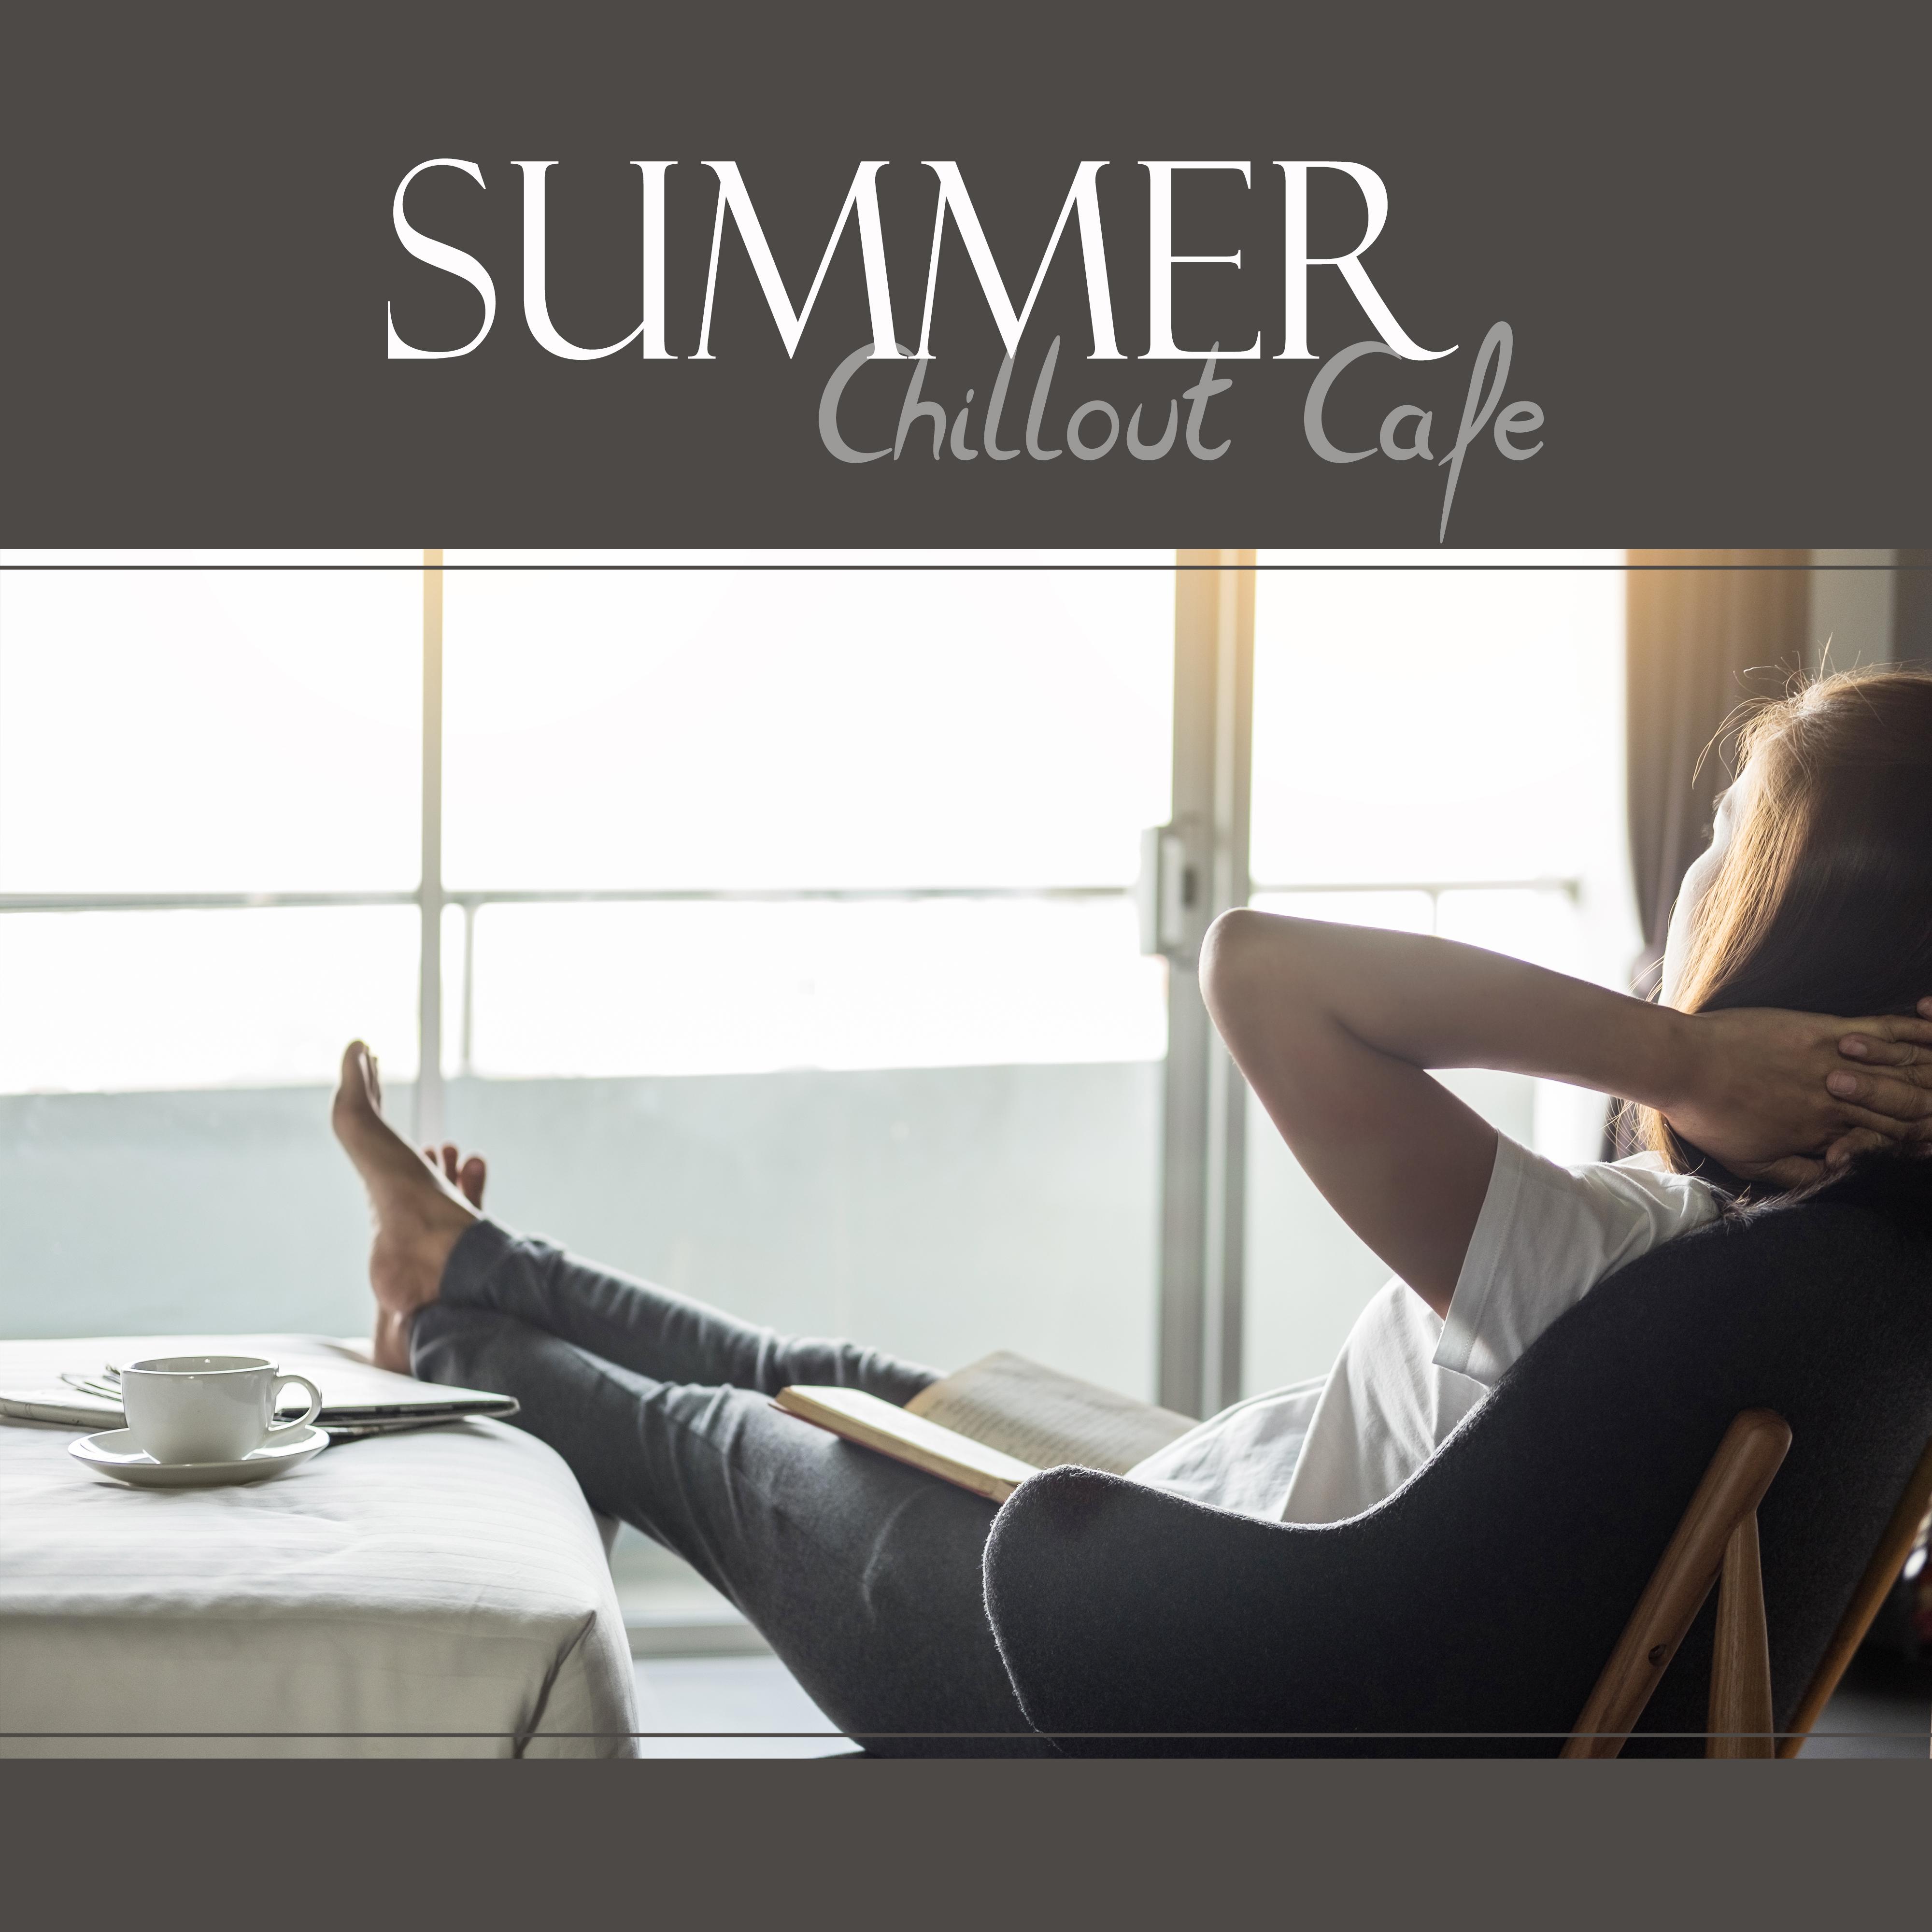 Summer Chillout Cafe